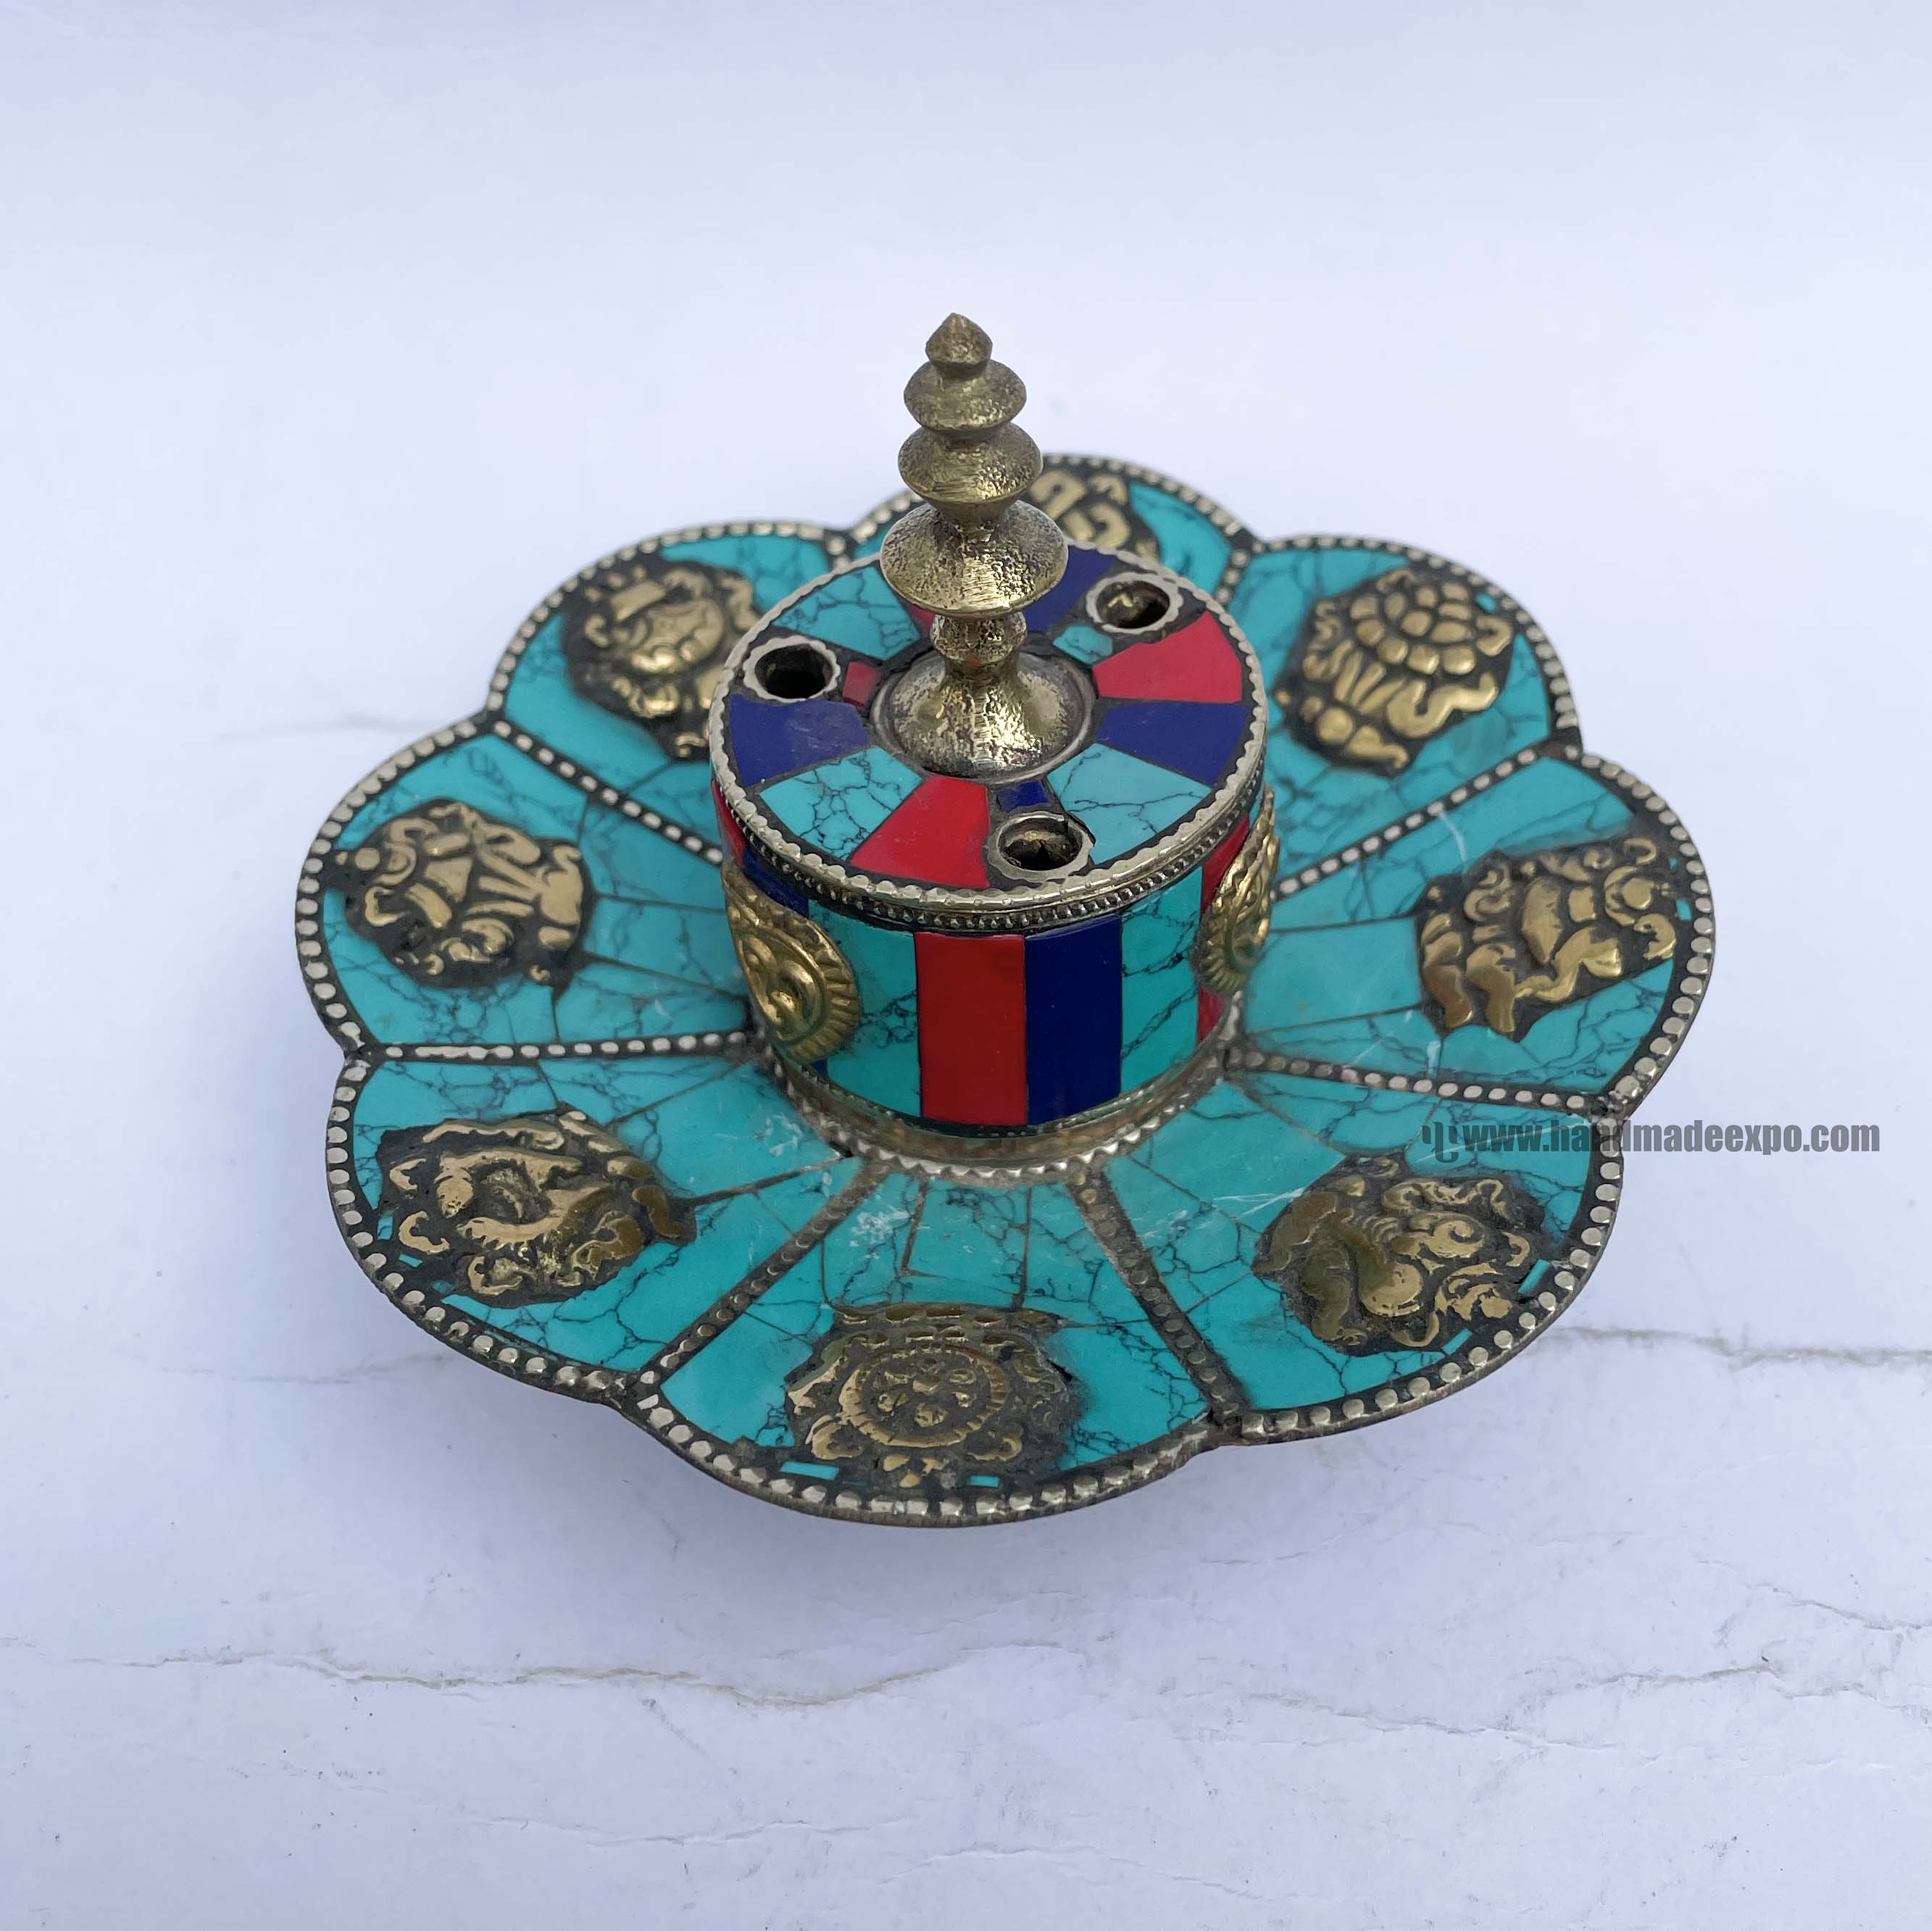 Hand Beaten Metal Incense Burner, tourquise, Coral And Lapis Stone Setting